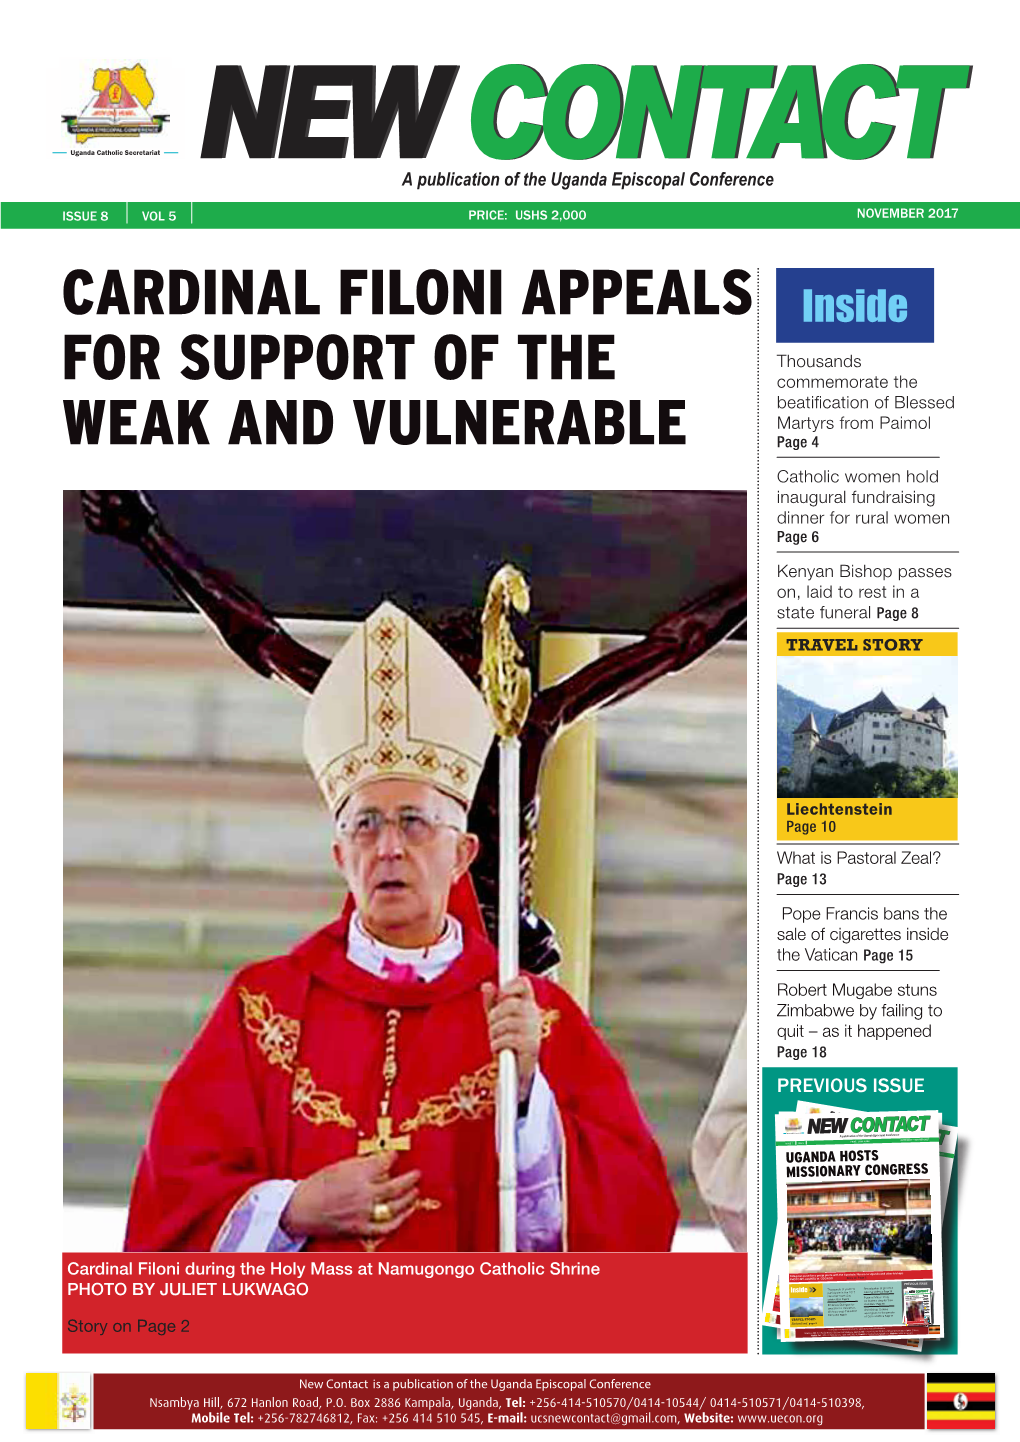 Cardinal Filoni Appeals for Support of the Weak And